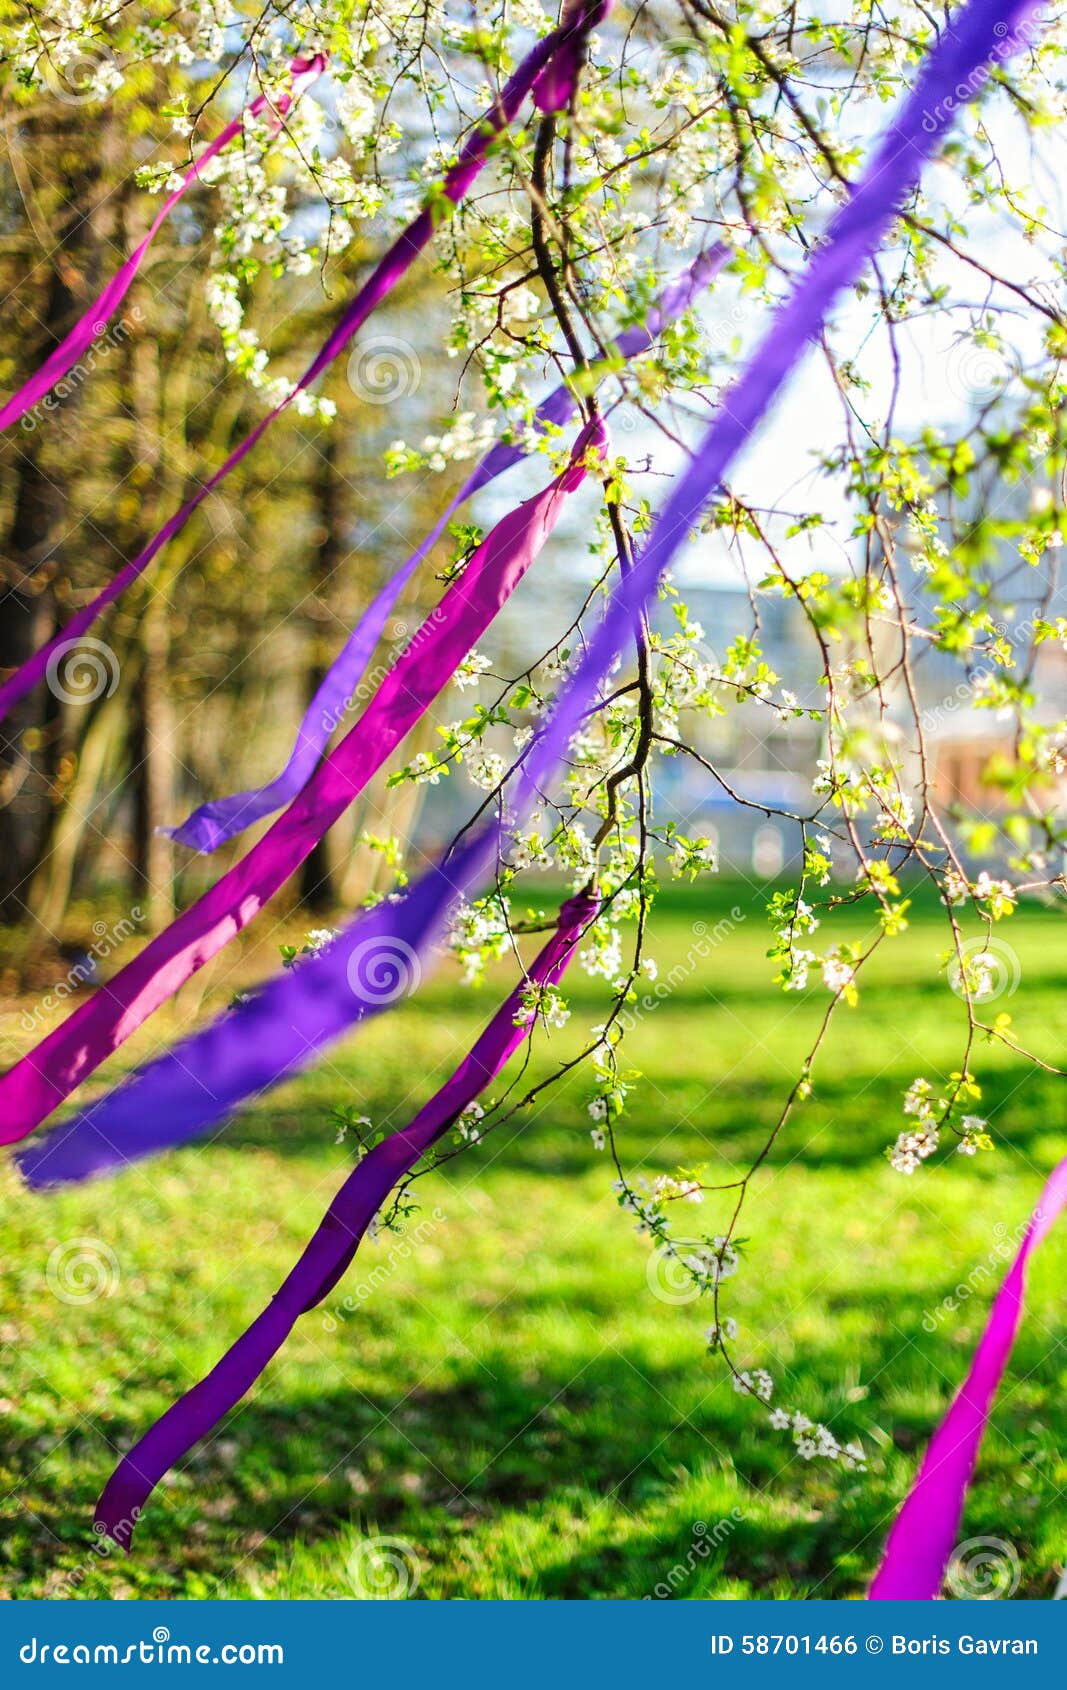 Spring blooming branch decorated with purple ribbons for an event, party or wedding on a sunny and windy day